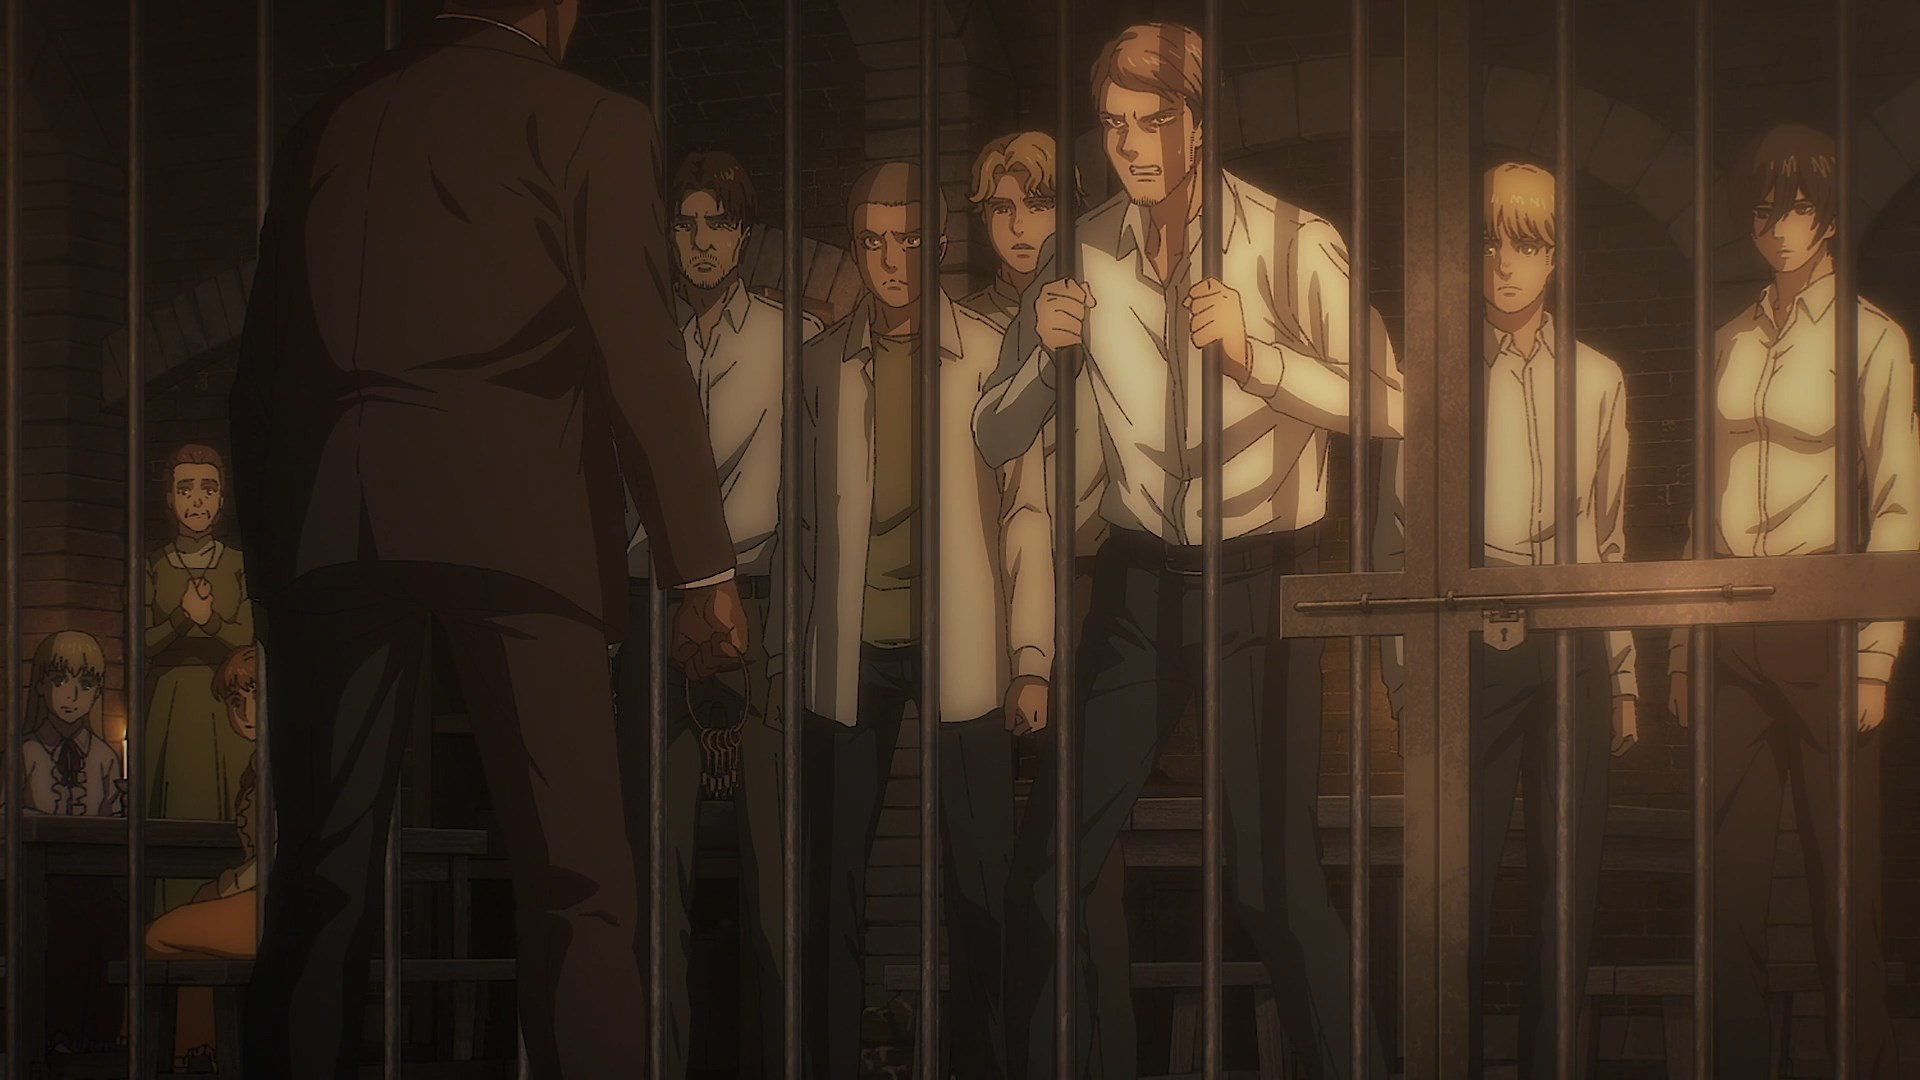 MyAnimeList.net - It's already one for the history books—Shingeki no Kyojin:  The Final Season's first episode is officially our biggest premiere of all  time! 🙌 Add it to your list: bit.ly/2I8zdle